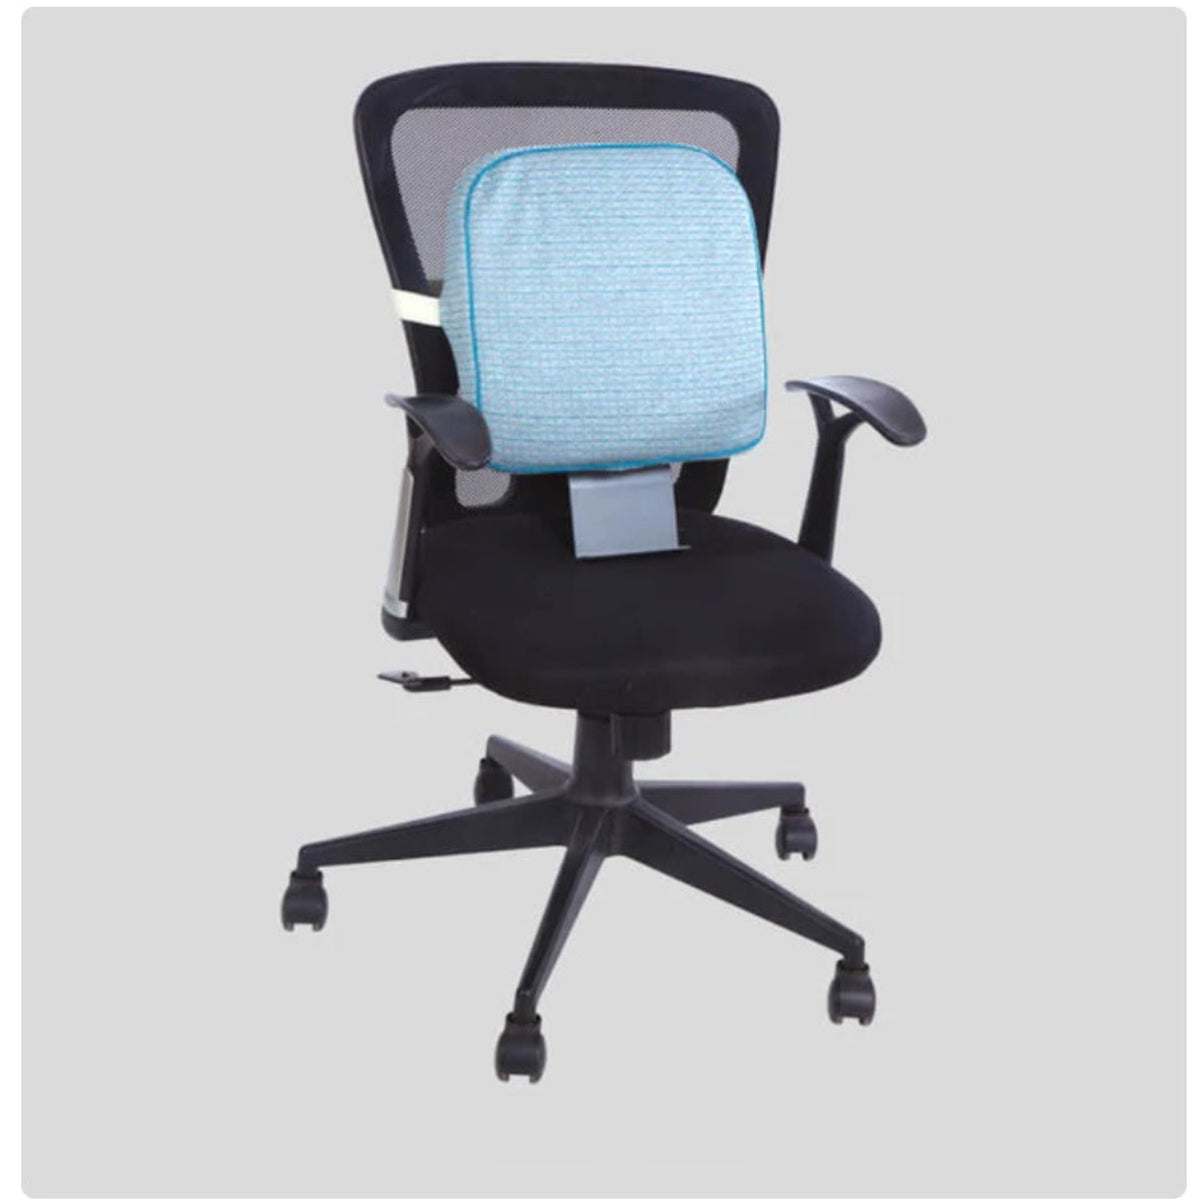 Flamingo Health Orthopaedic Premium Memory Foam Back Rest (With Height Adjustable Stand) Type Cushion & Pillows